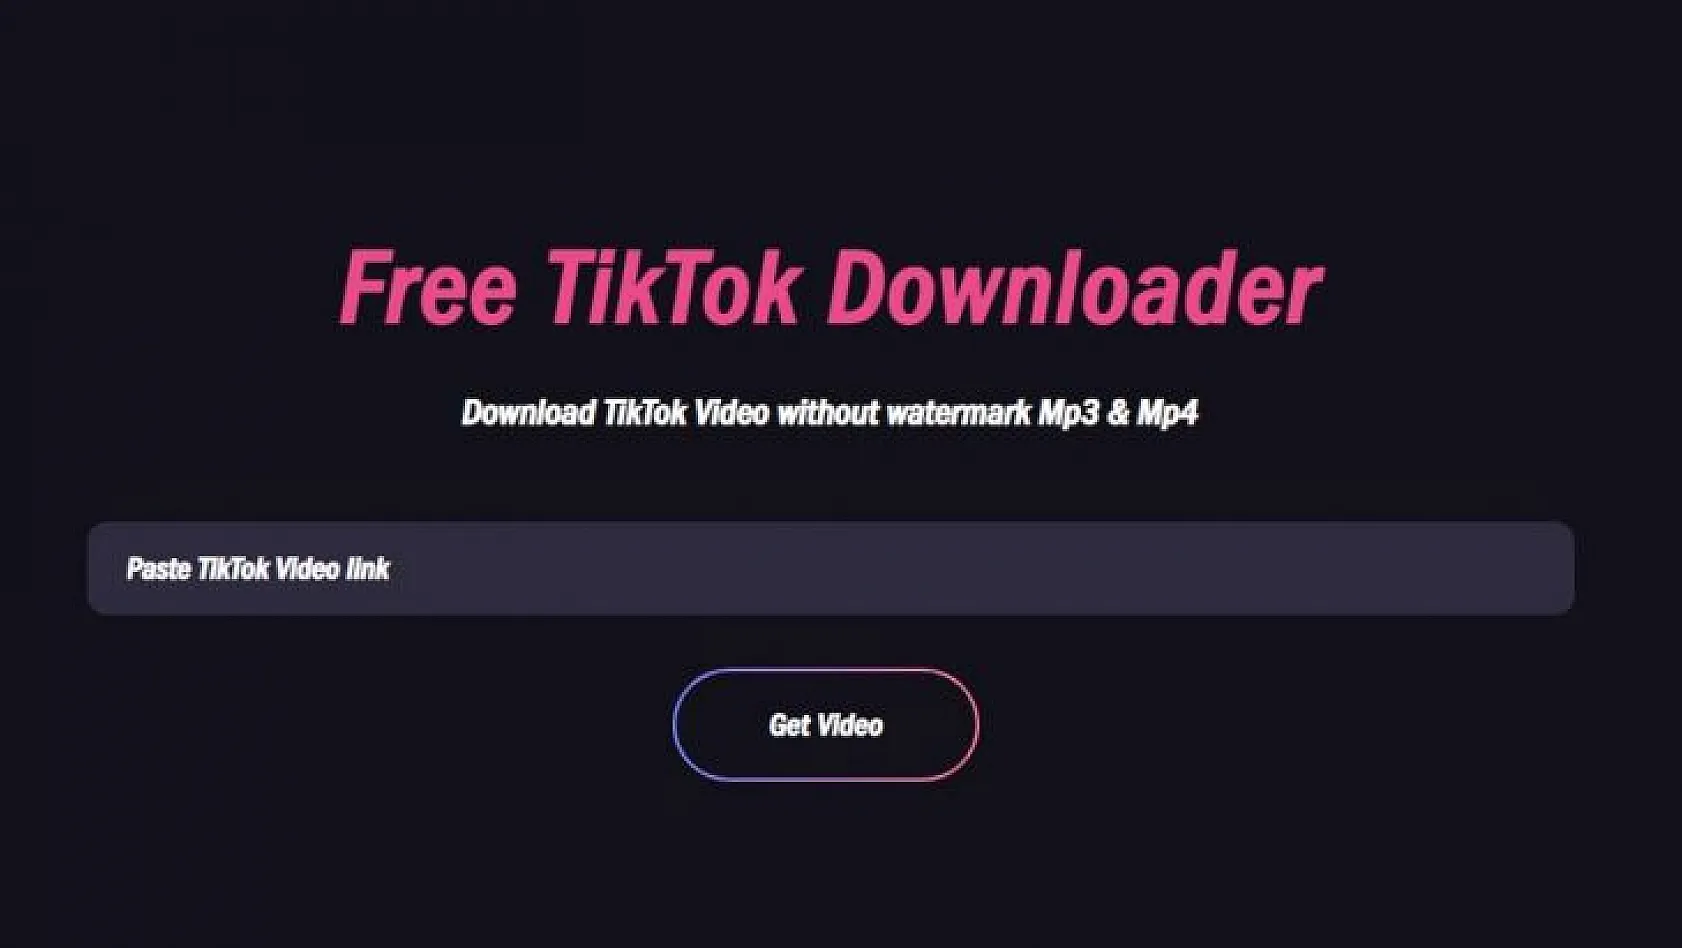 Can I Download Video From TikTok?